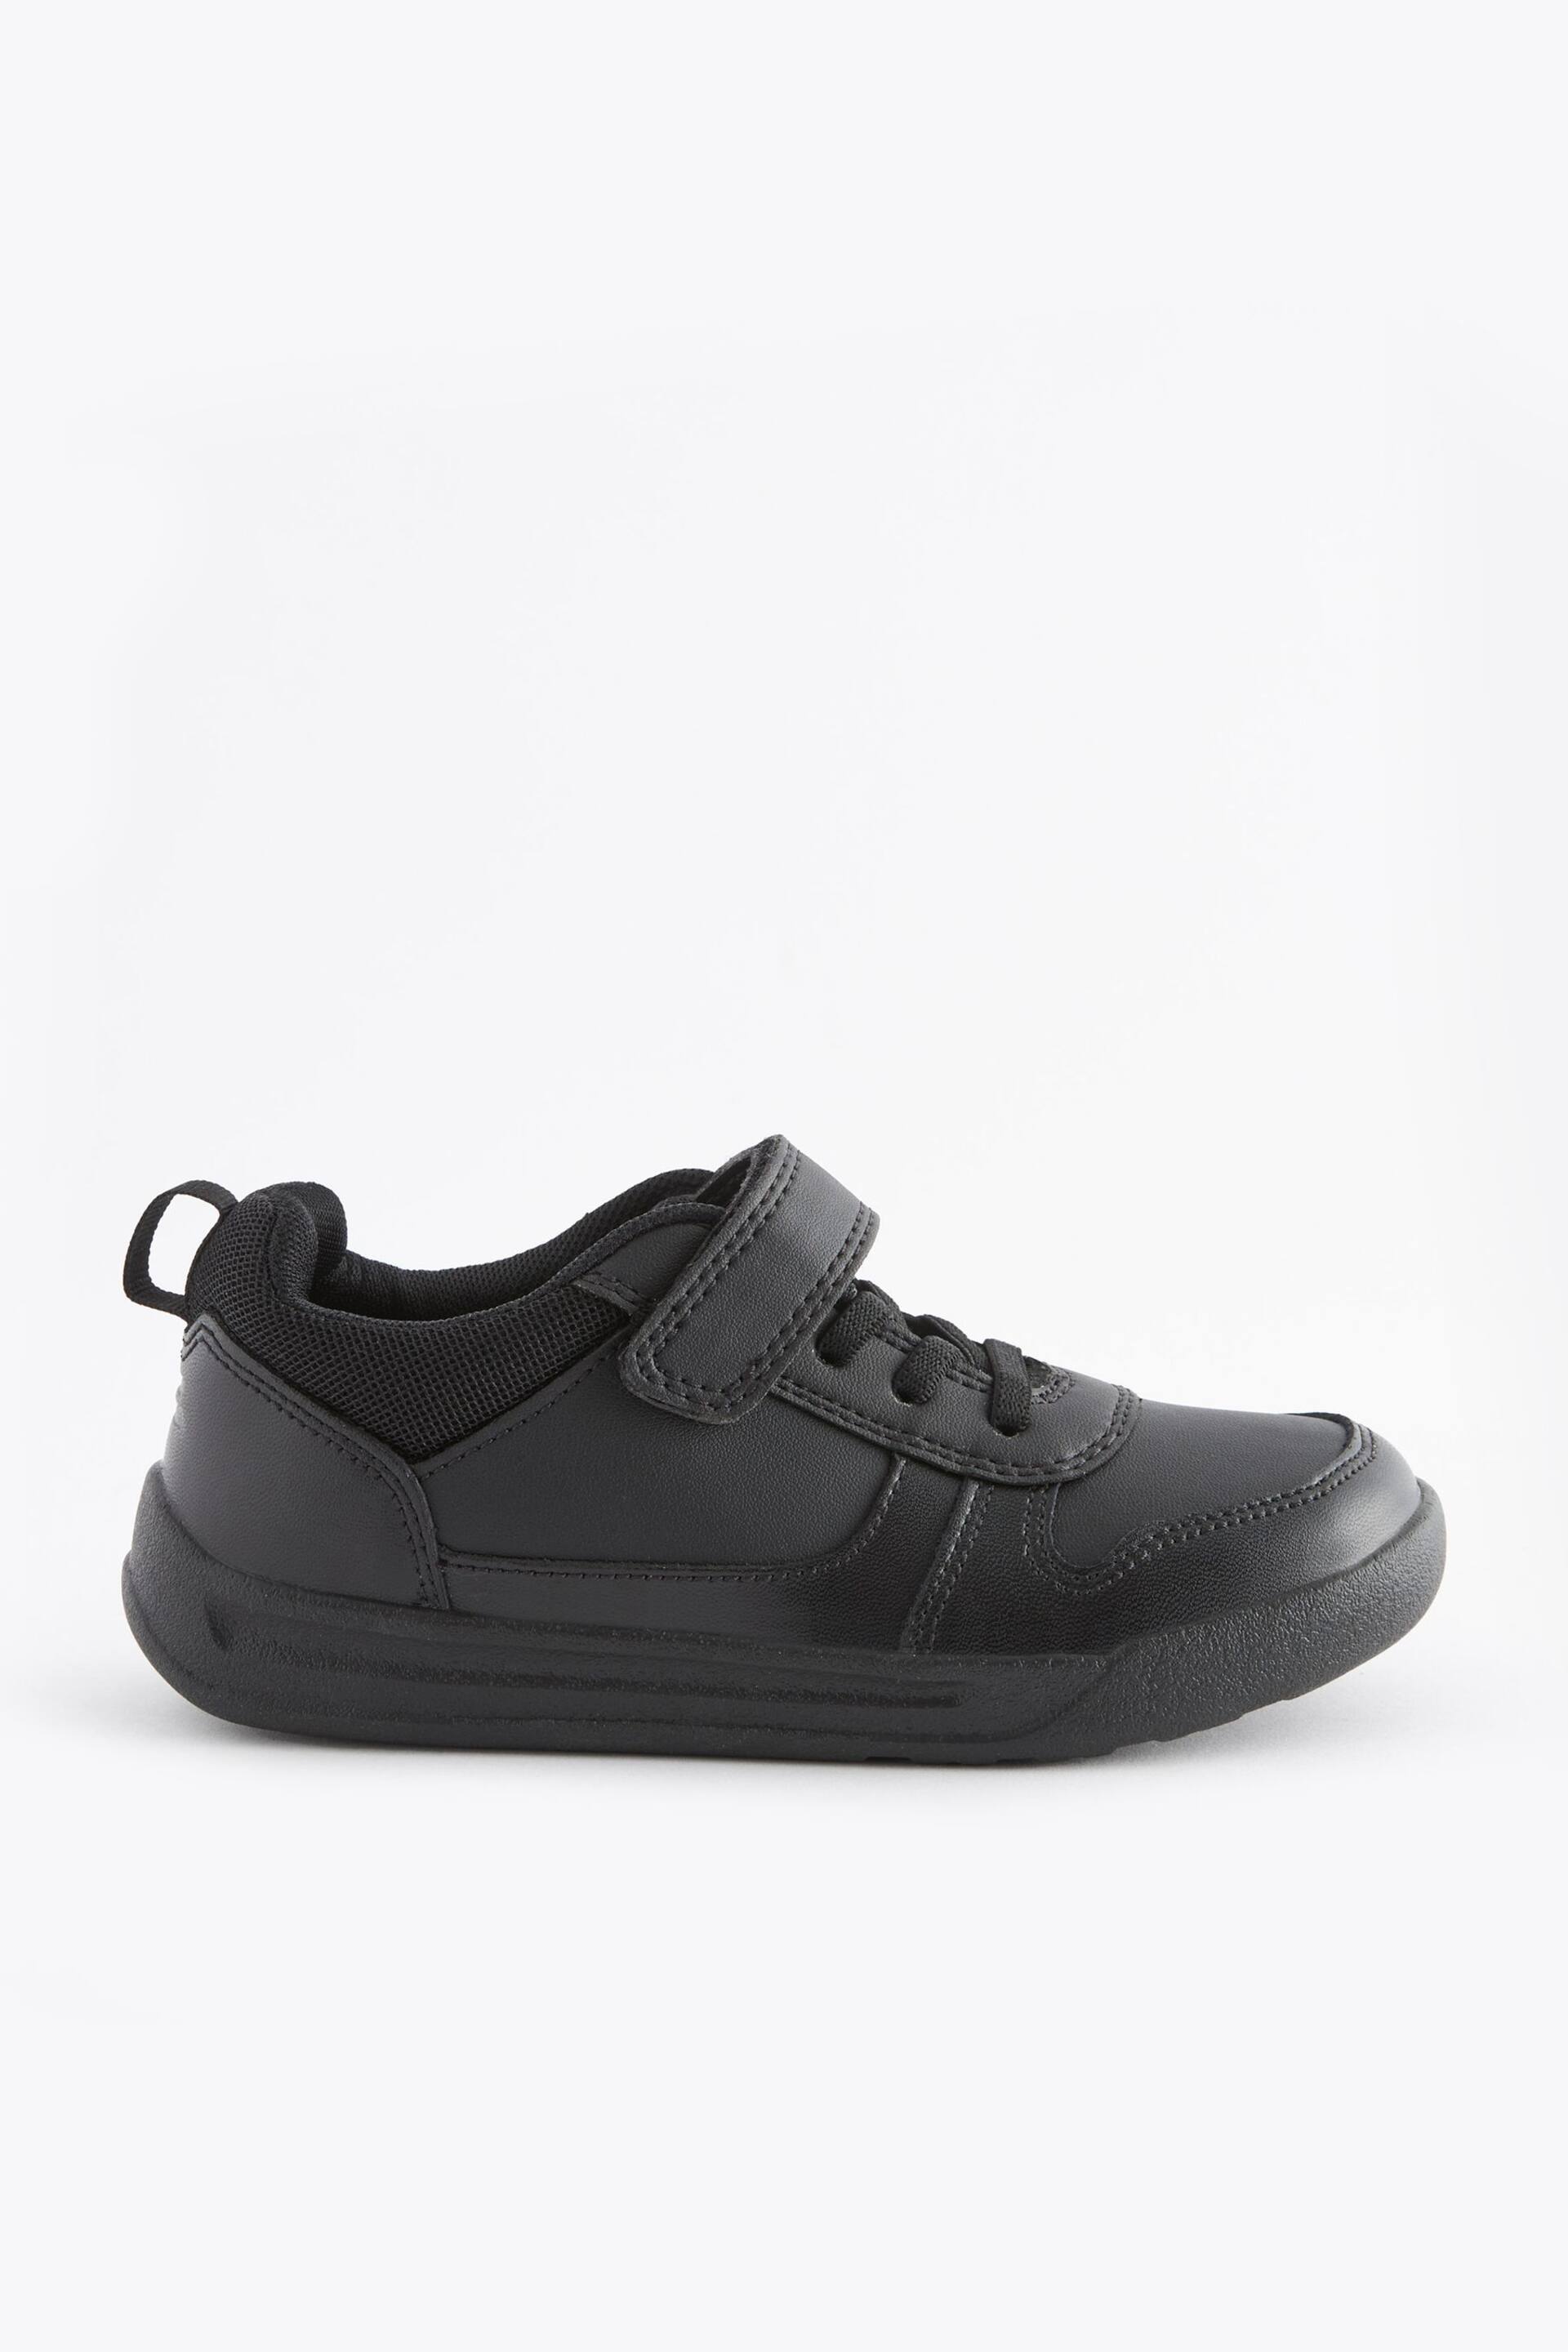 Black Elastic Lace Single Strap Wide Fit (G) School Trainers - Image 3 of 5